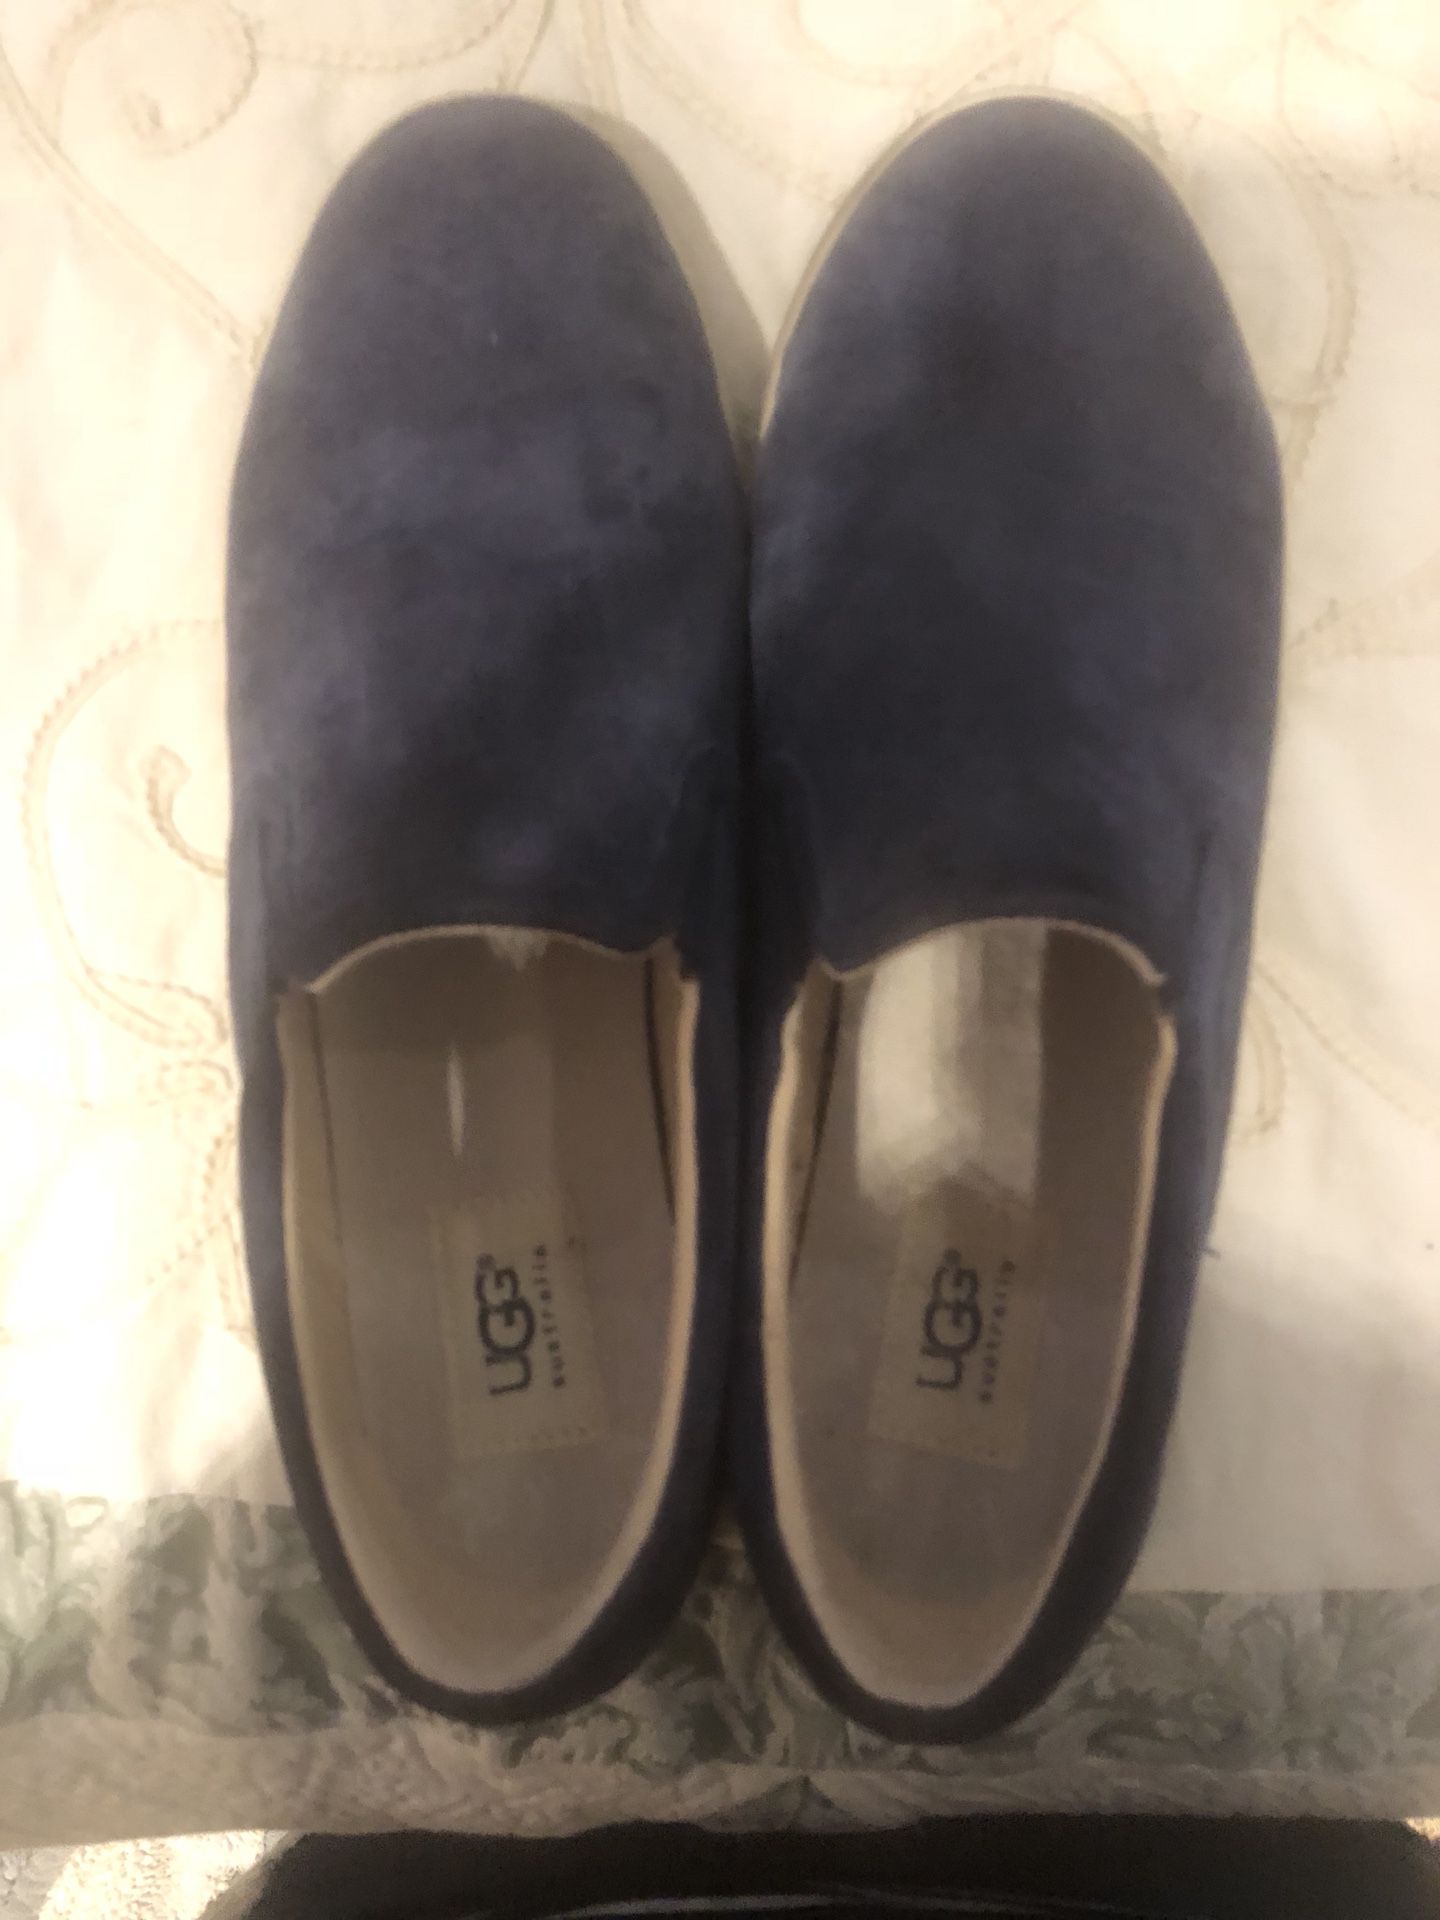 UGG sneakers size 8 1/2